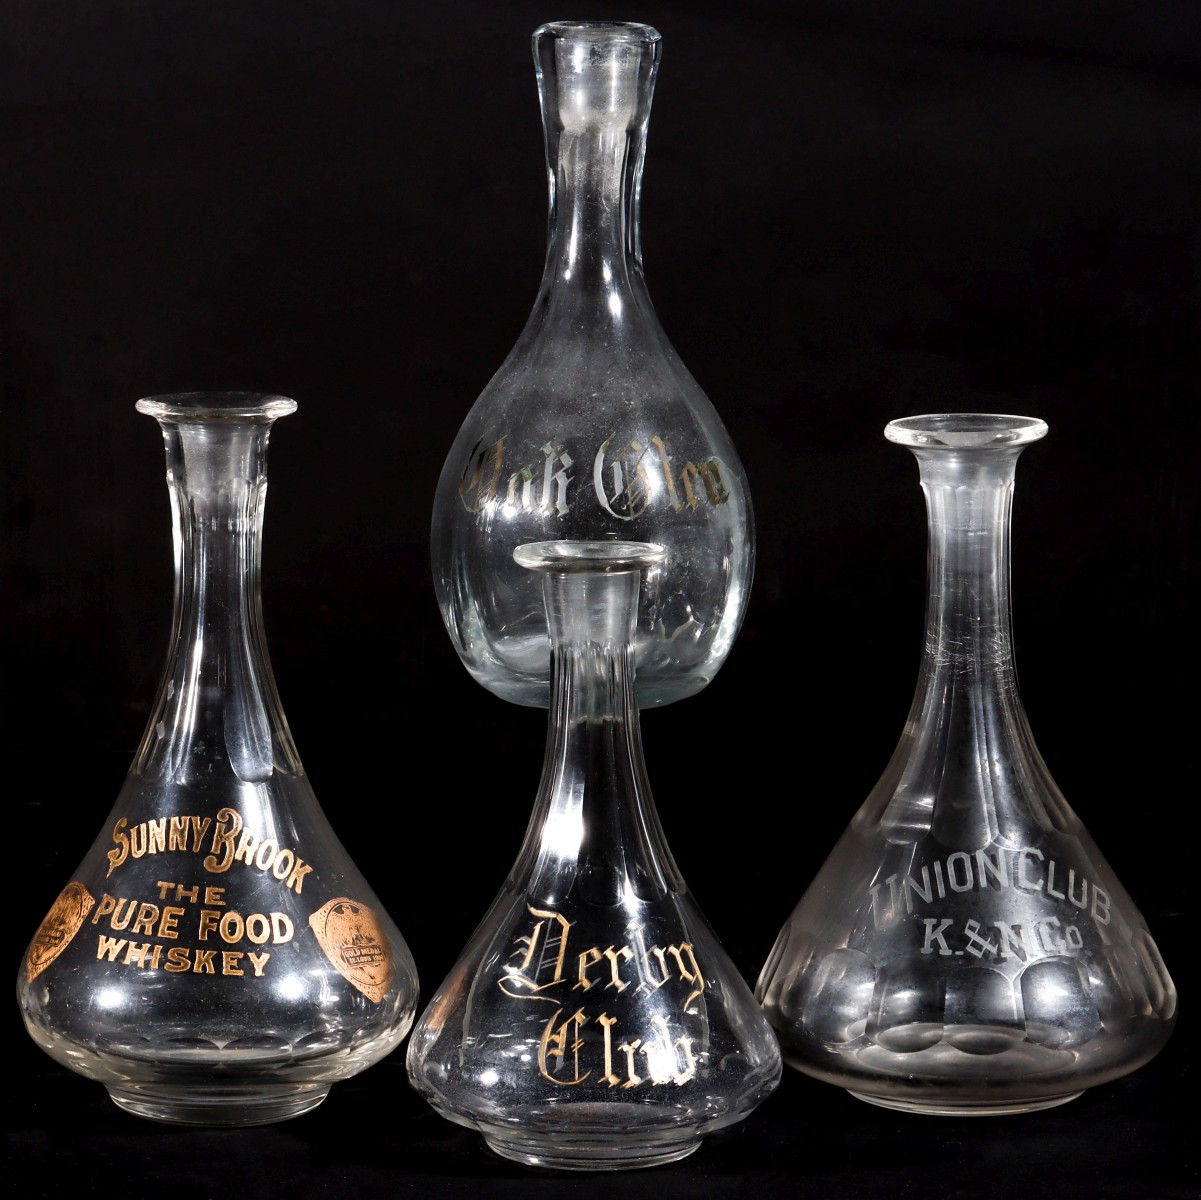 BACK BAR WHISKEY DECANTERS WITH ETCHED ADVERTISING